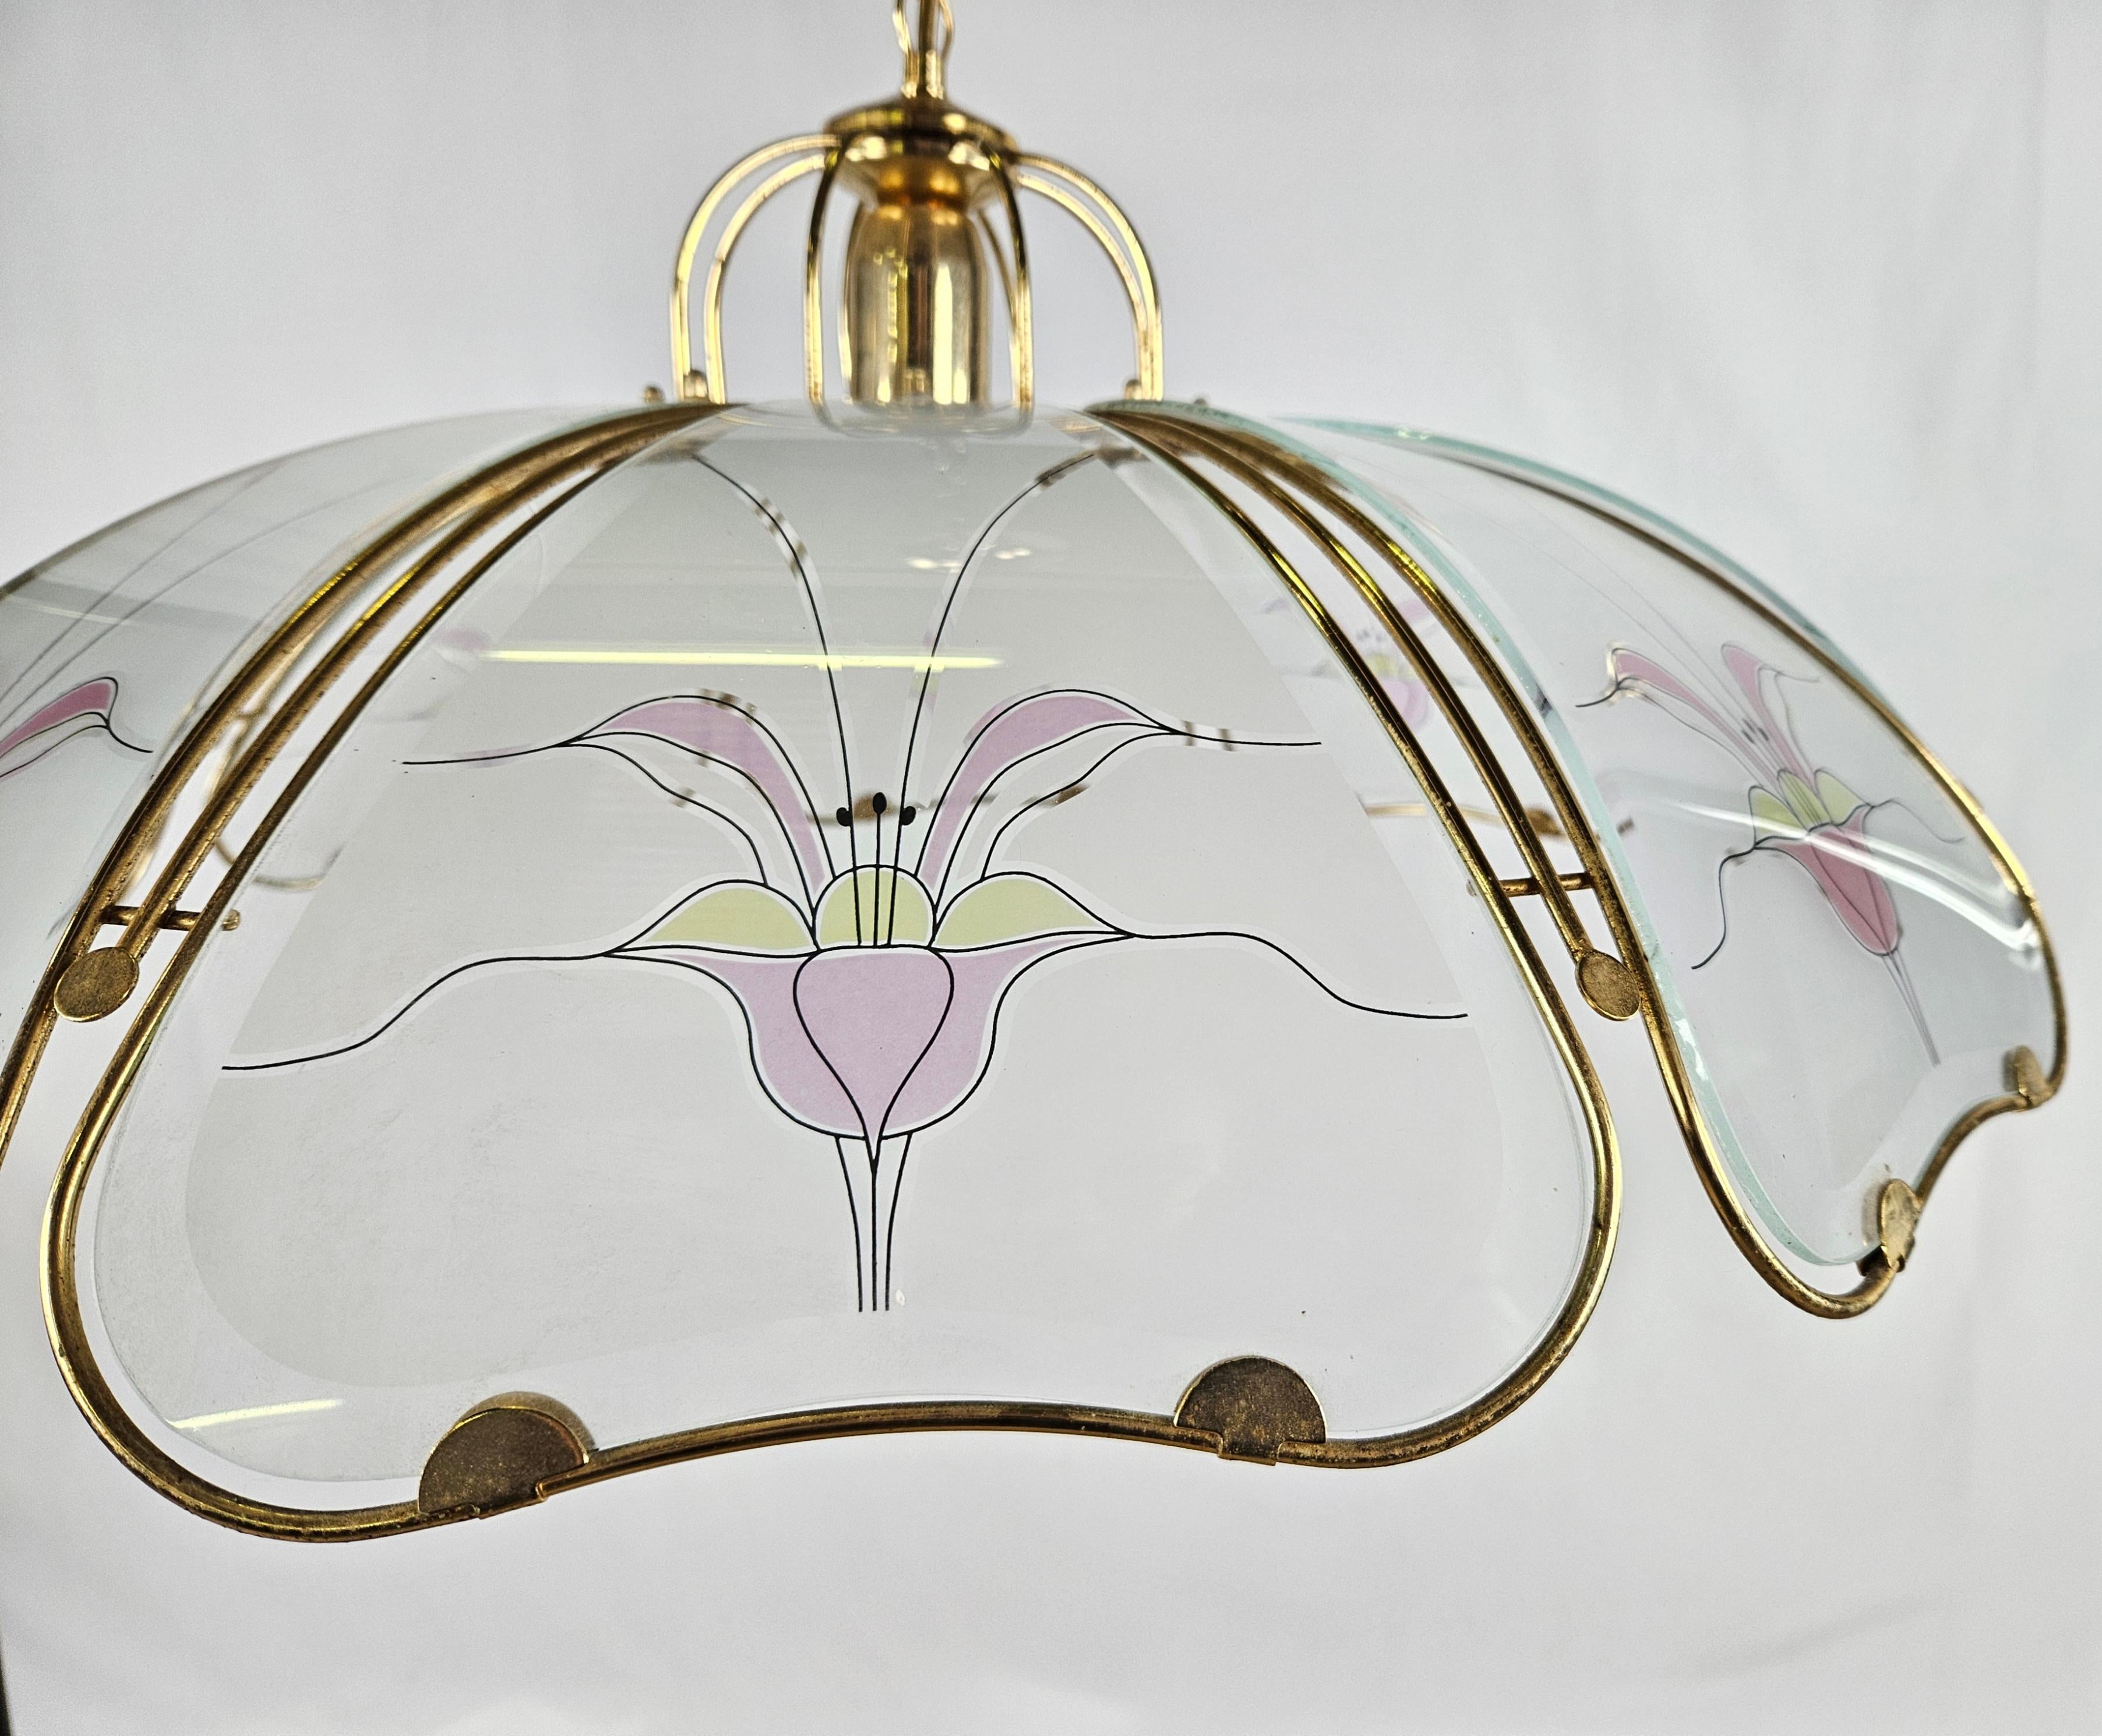 Large Italian Art Nouveau style kitchen or living room chandelier, 1970s production.

It features a brass frame surrounded by partly frosted glass with floral decorations.

Very elegant, ideal for any environment.